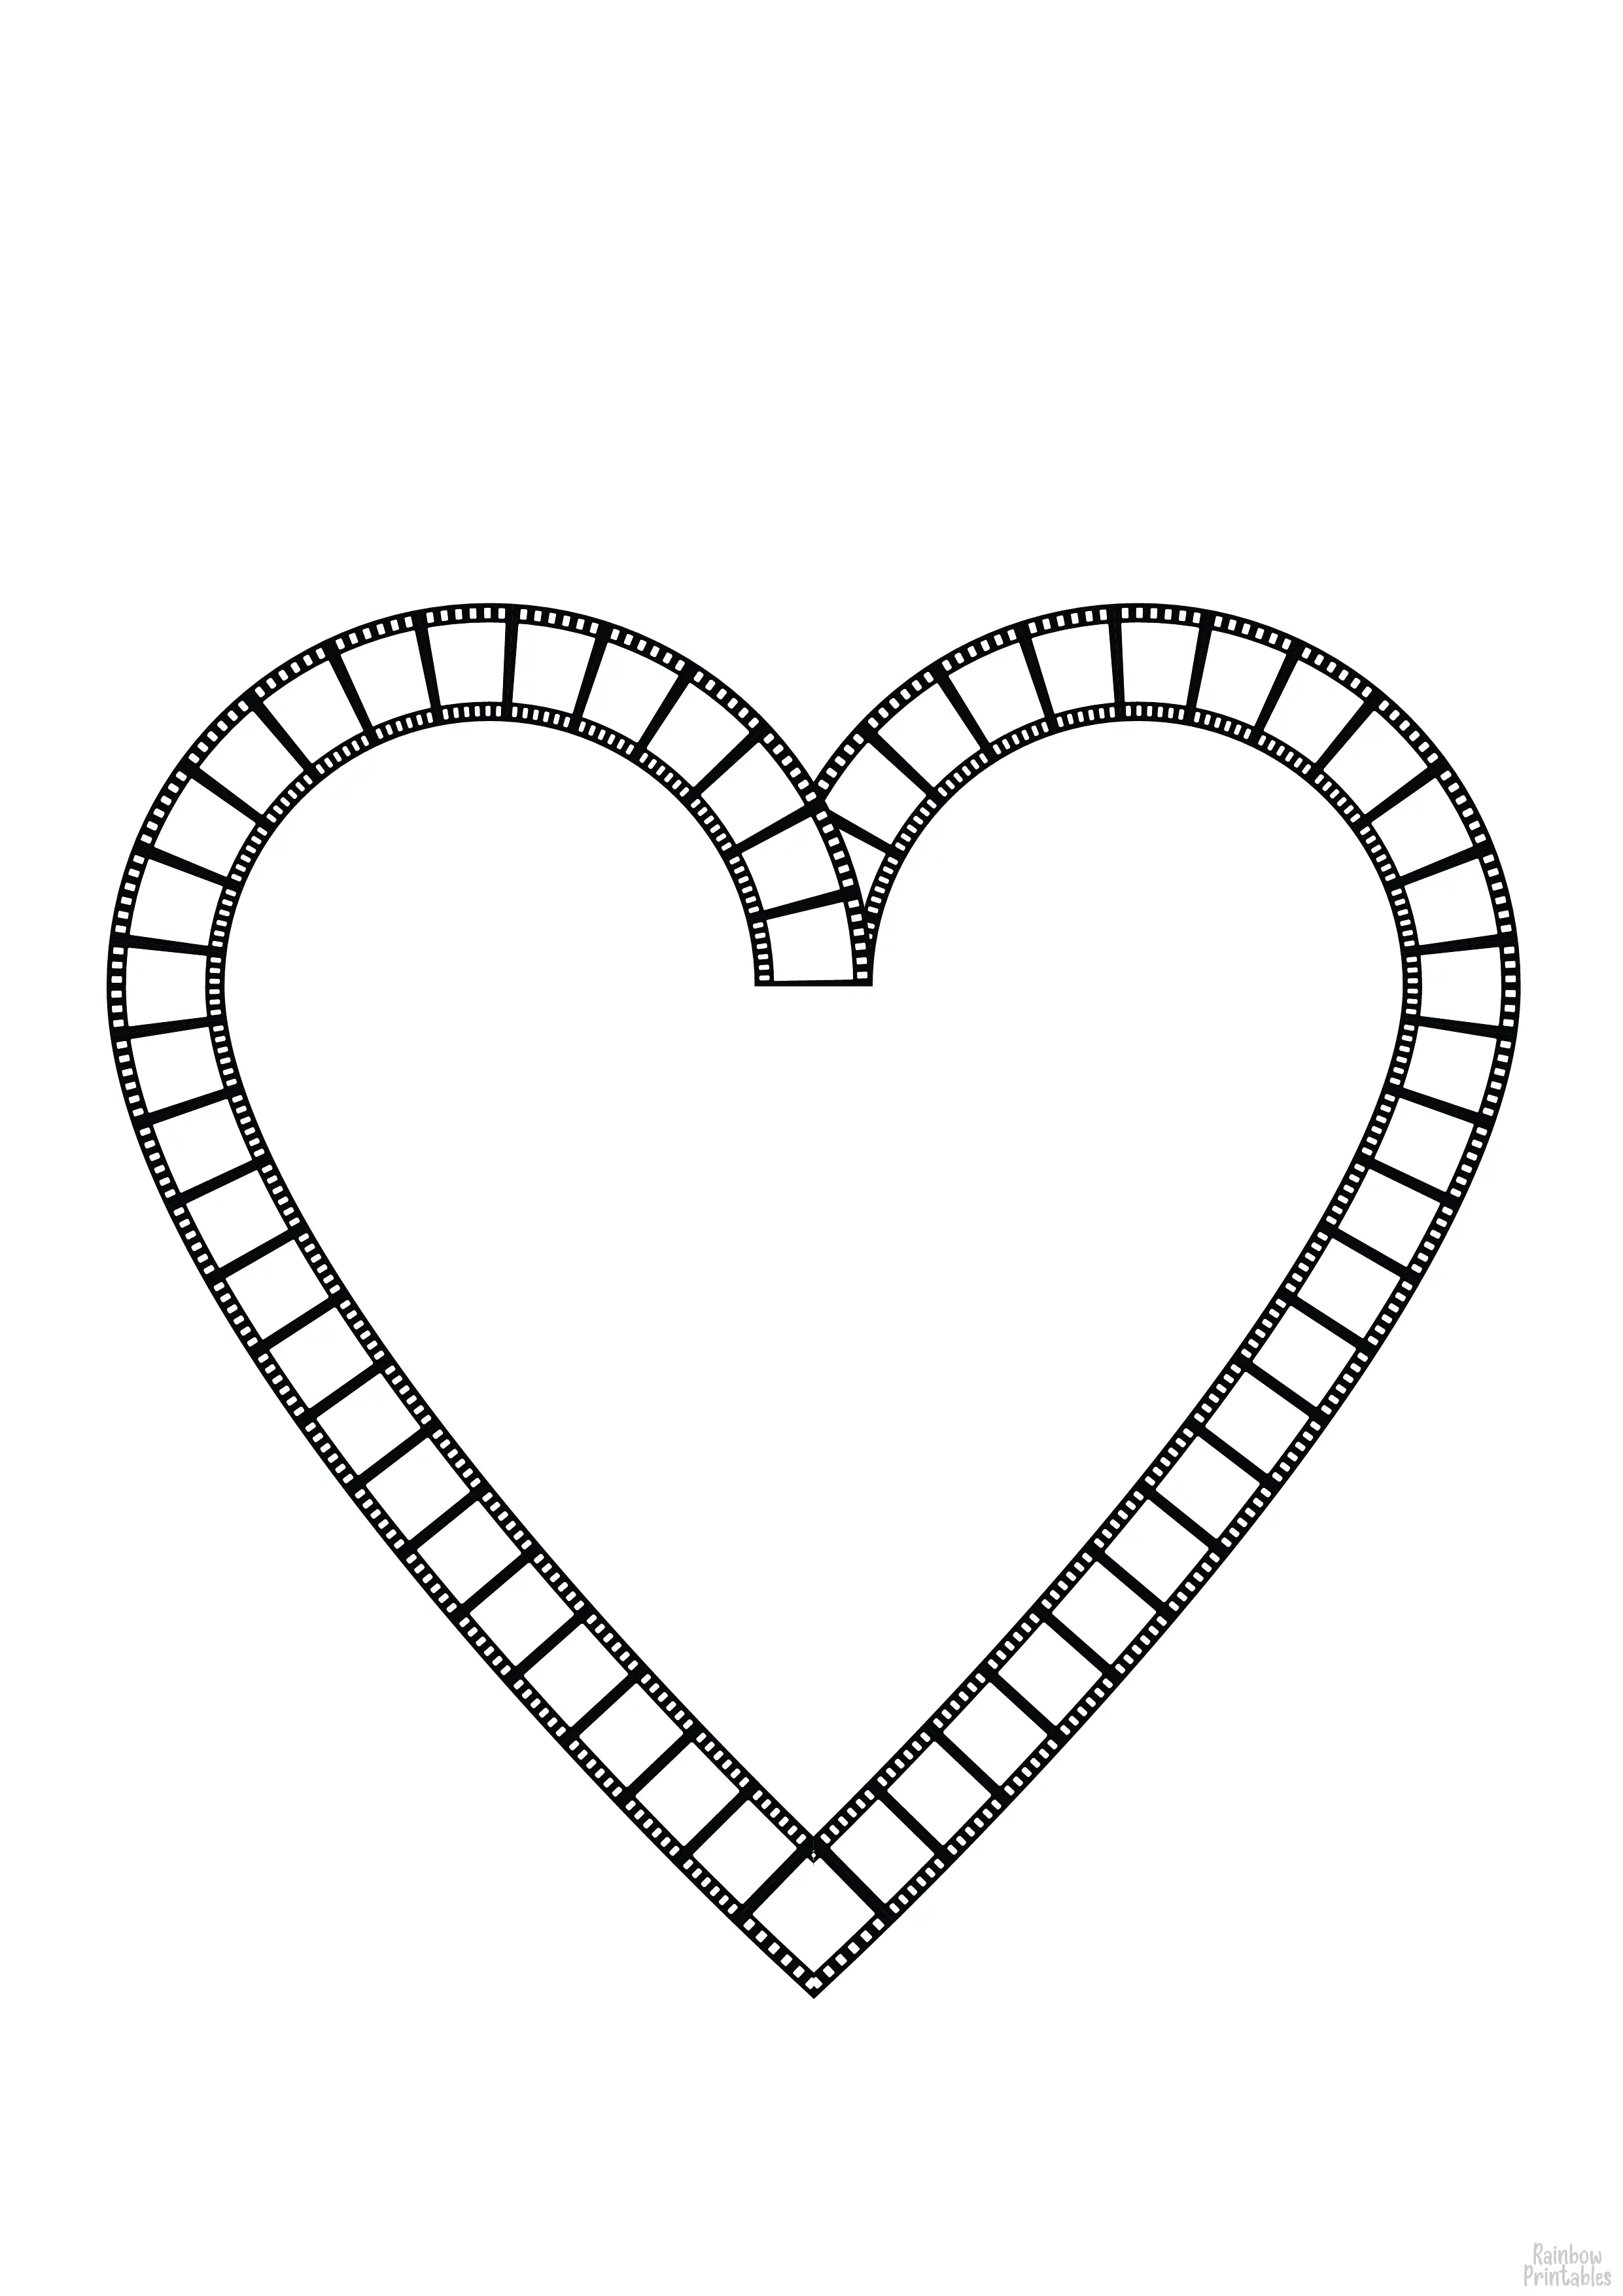 Film Valentine DAY PAGE FRAMES HEART SHAPE Clipart Coloring Pages for Kids Adults Art Activities Line Art-04